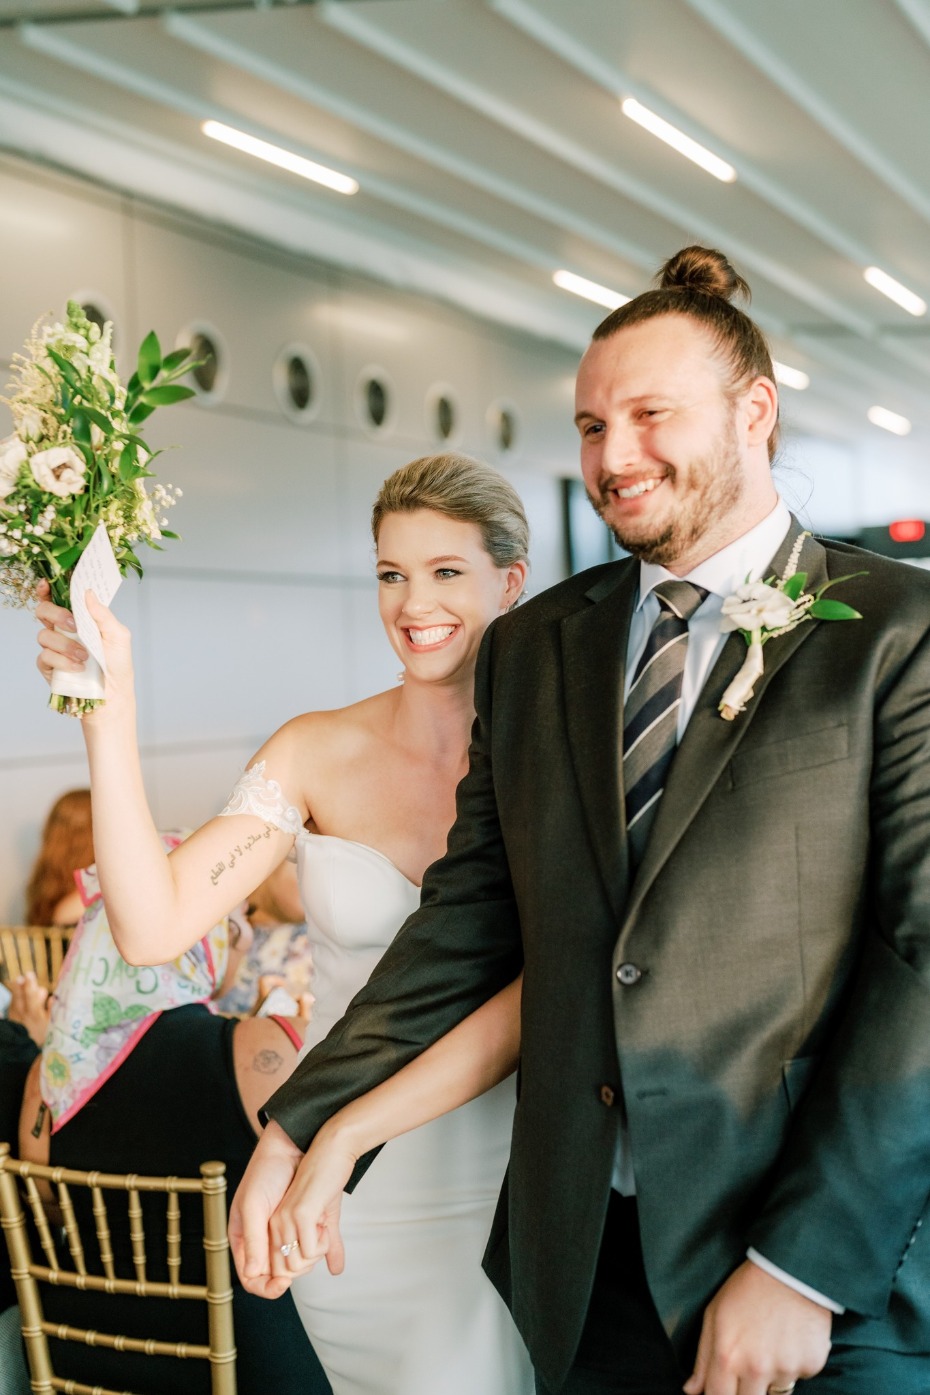 Timeless DC Wedding Inspiration At The International Spy Museum Puts the Class In Classified